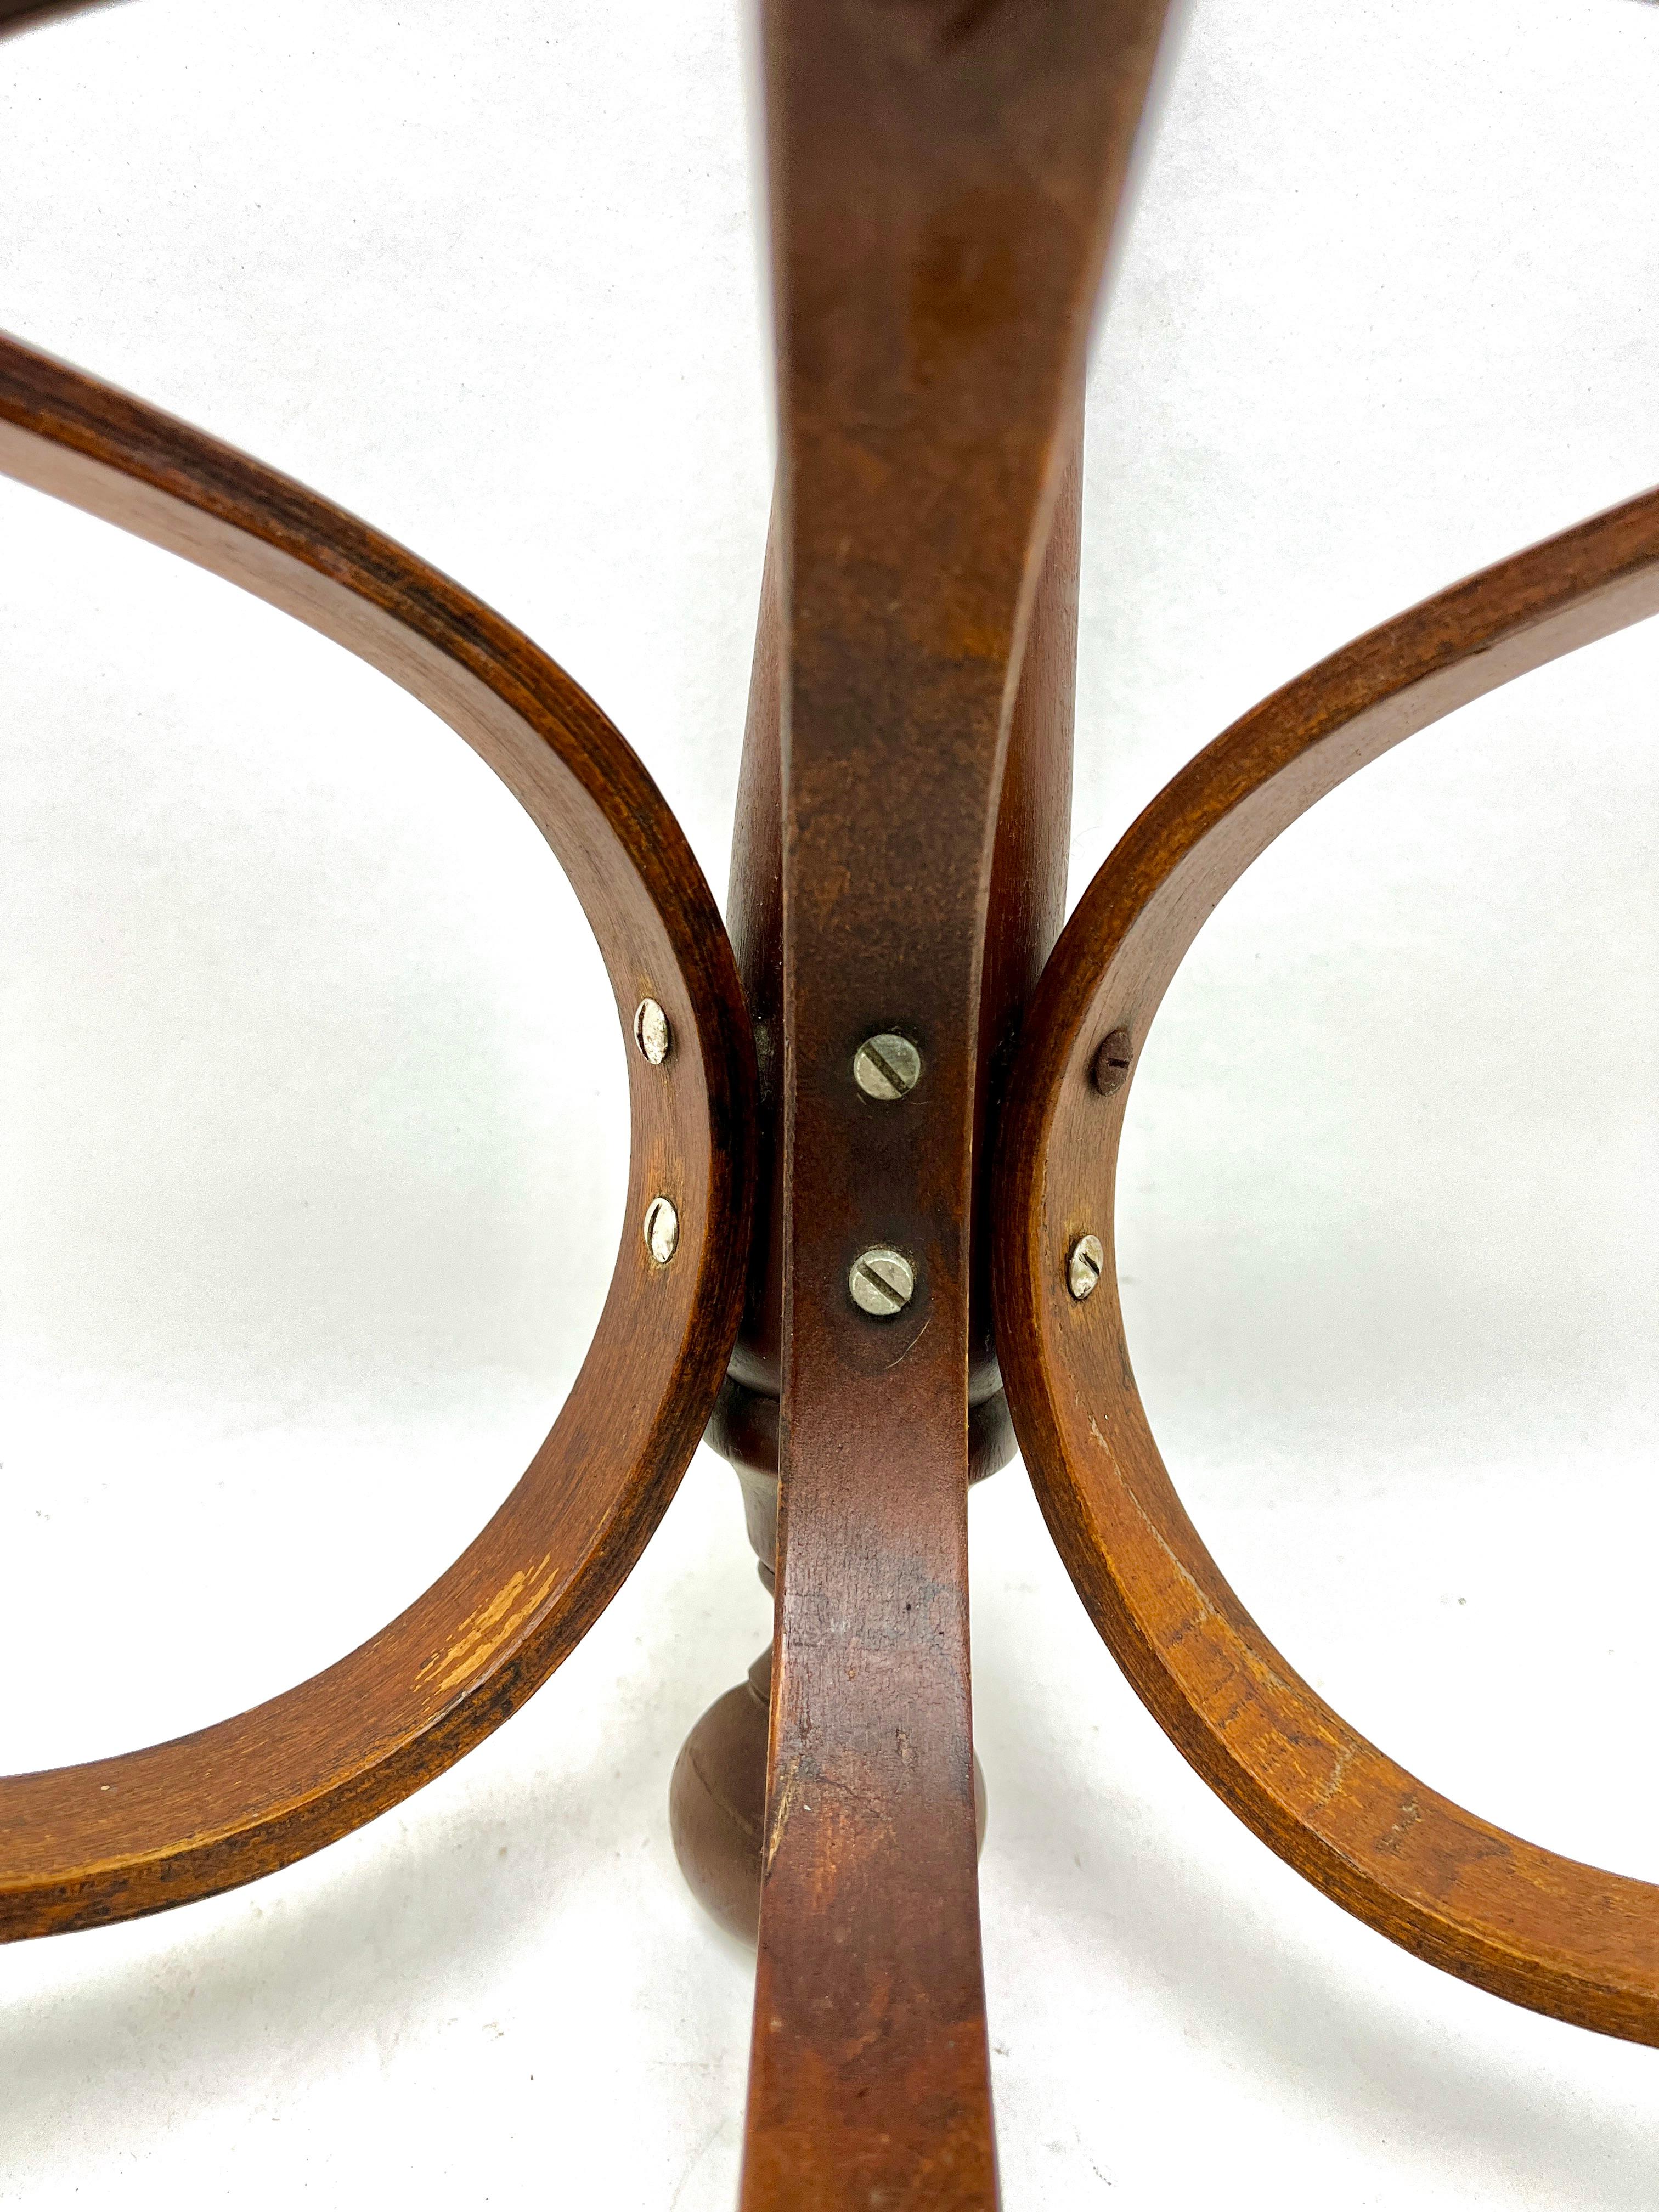 Early 20th Century Art Nouveau Bentwood Wall Coat Rack Attributed to Thonet, Vienna, 1910s